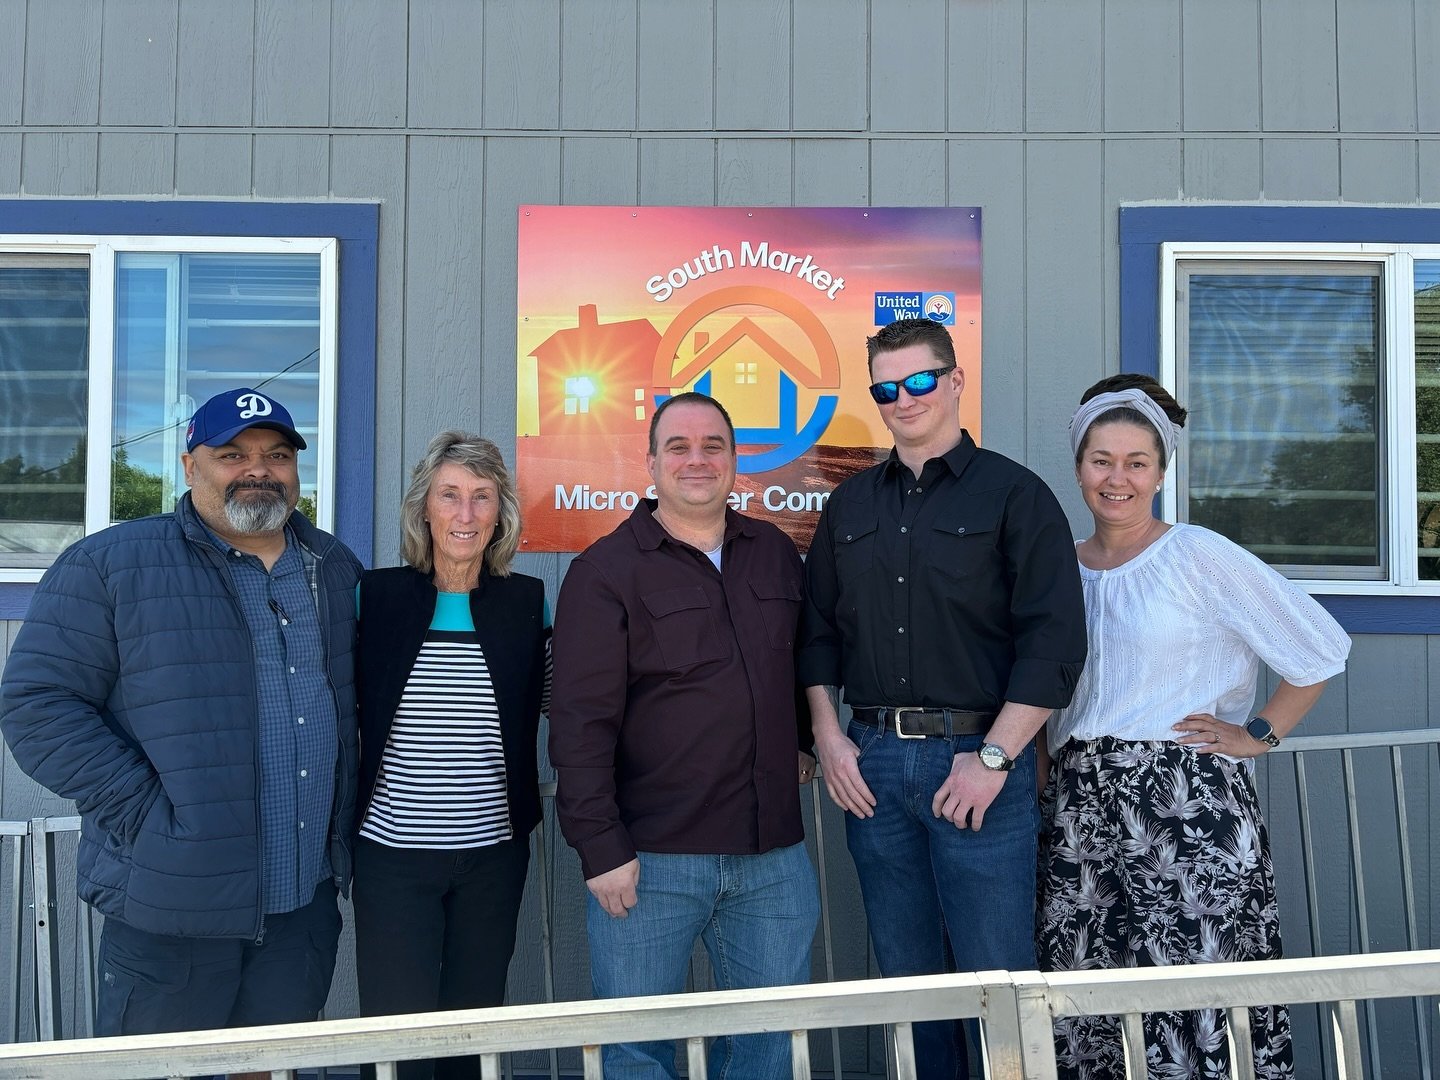 We are excited to announce our partnership with the Empire Recovery Center to bring substance use support to the South Market Micro Shelter Community! Empire Recovery Center staff will be at the micro shelter site weekly to meet with residents who wa